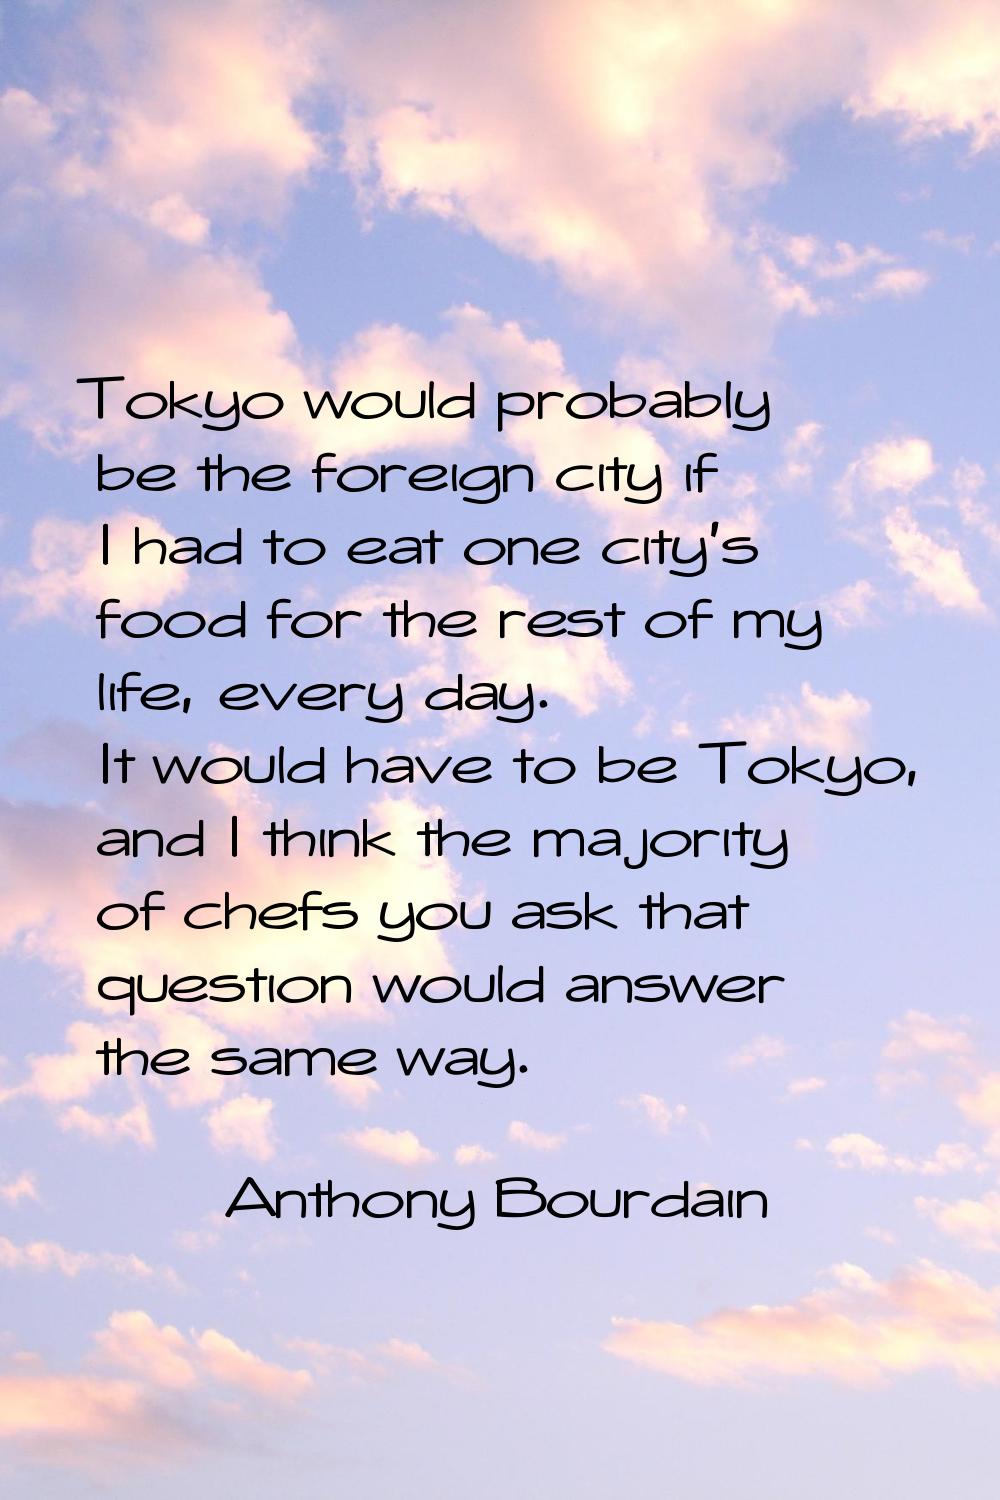 Tokyo would probably be the foreign city if I had to eat one city's food for the rest of my life, e